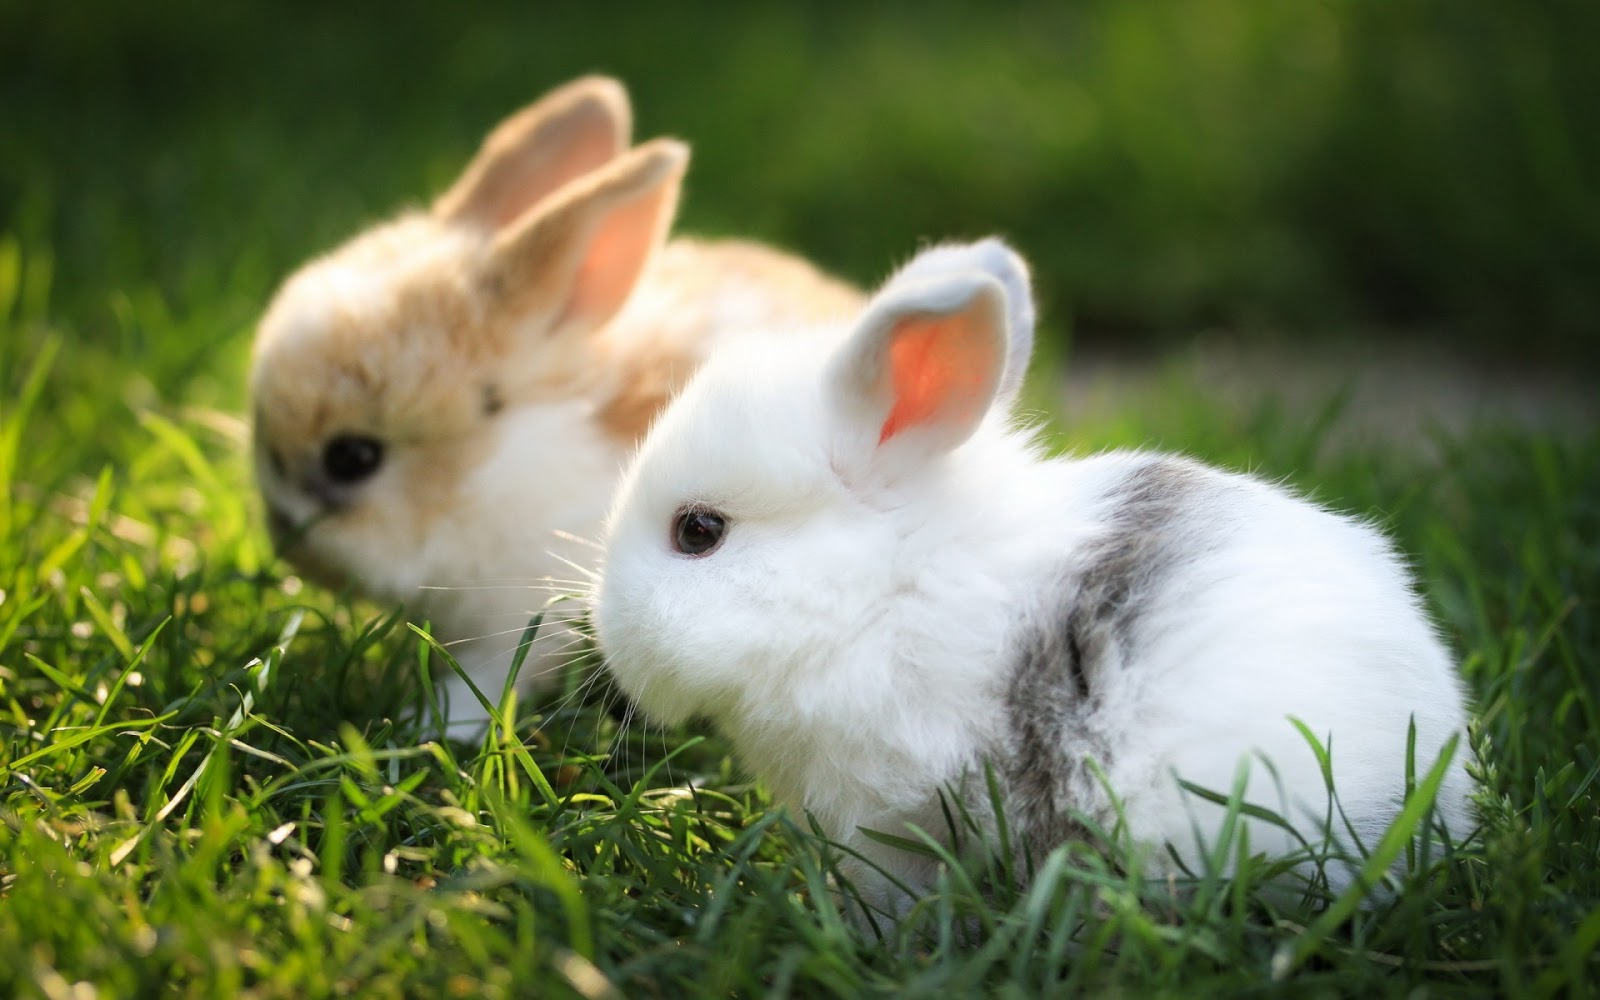 white rabbit babbies grass hd images free download